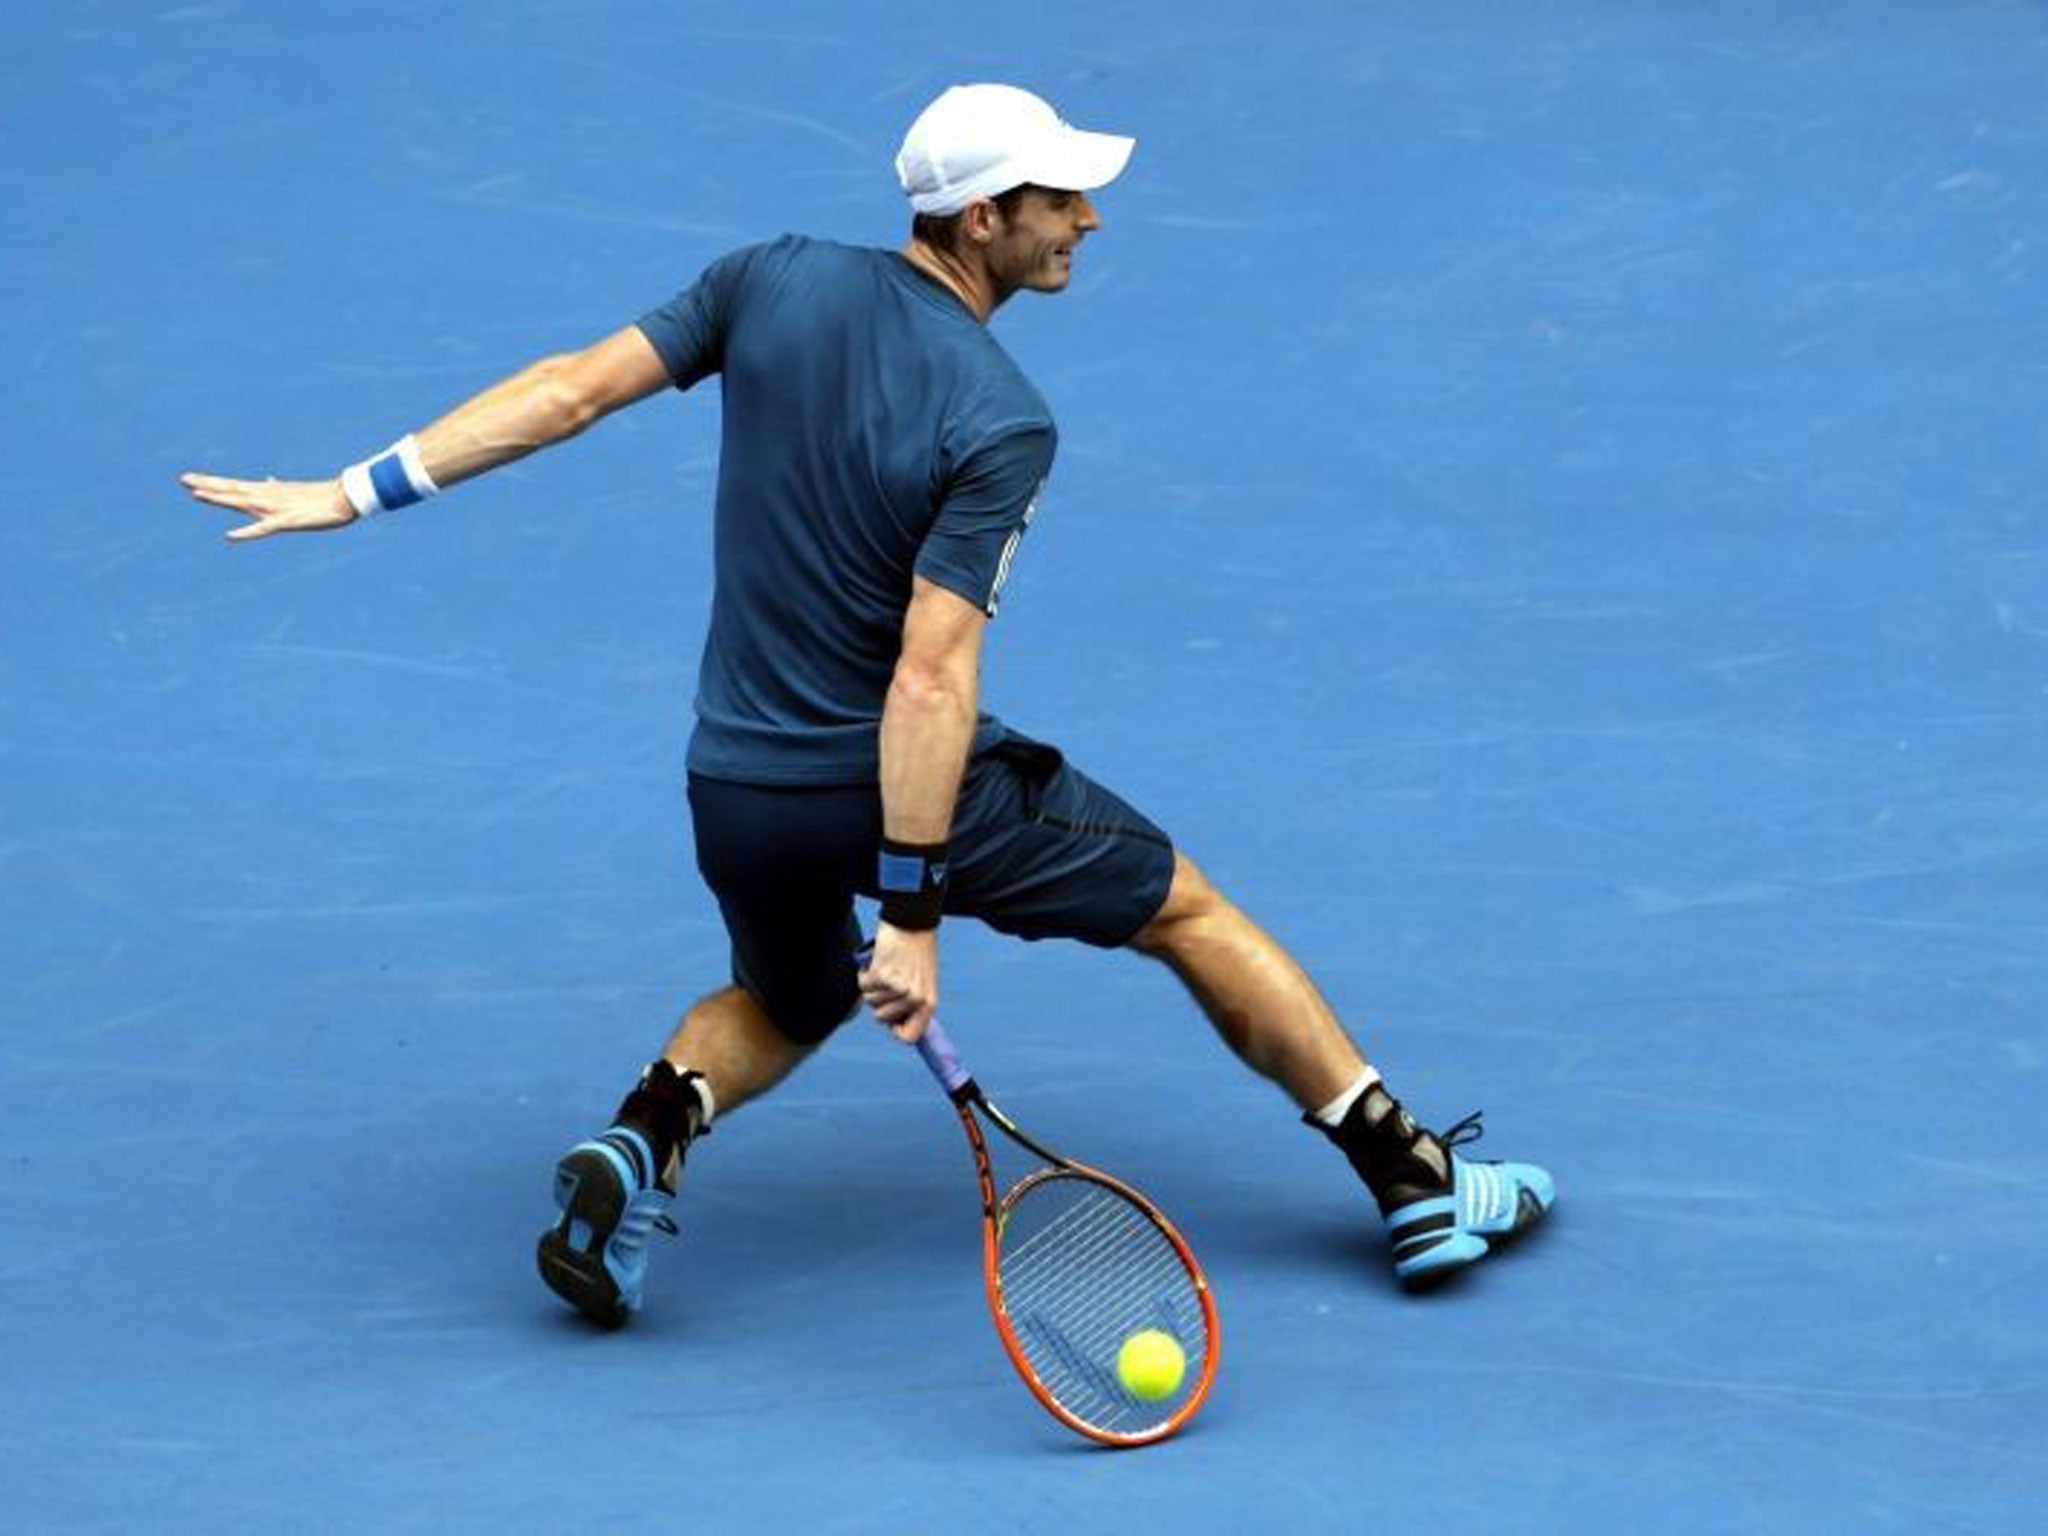 Blue wonder: Andy Murray is hot favourite to follow up his win against Feliciano Lopez and reach the quarter-finals